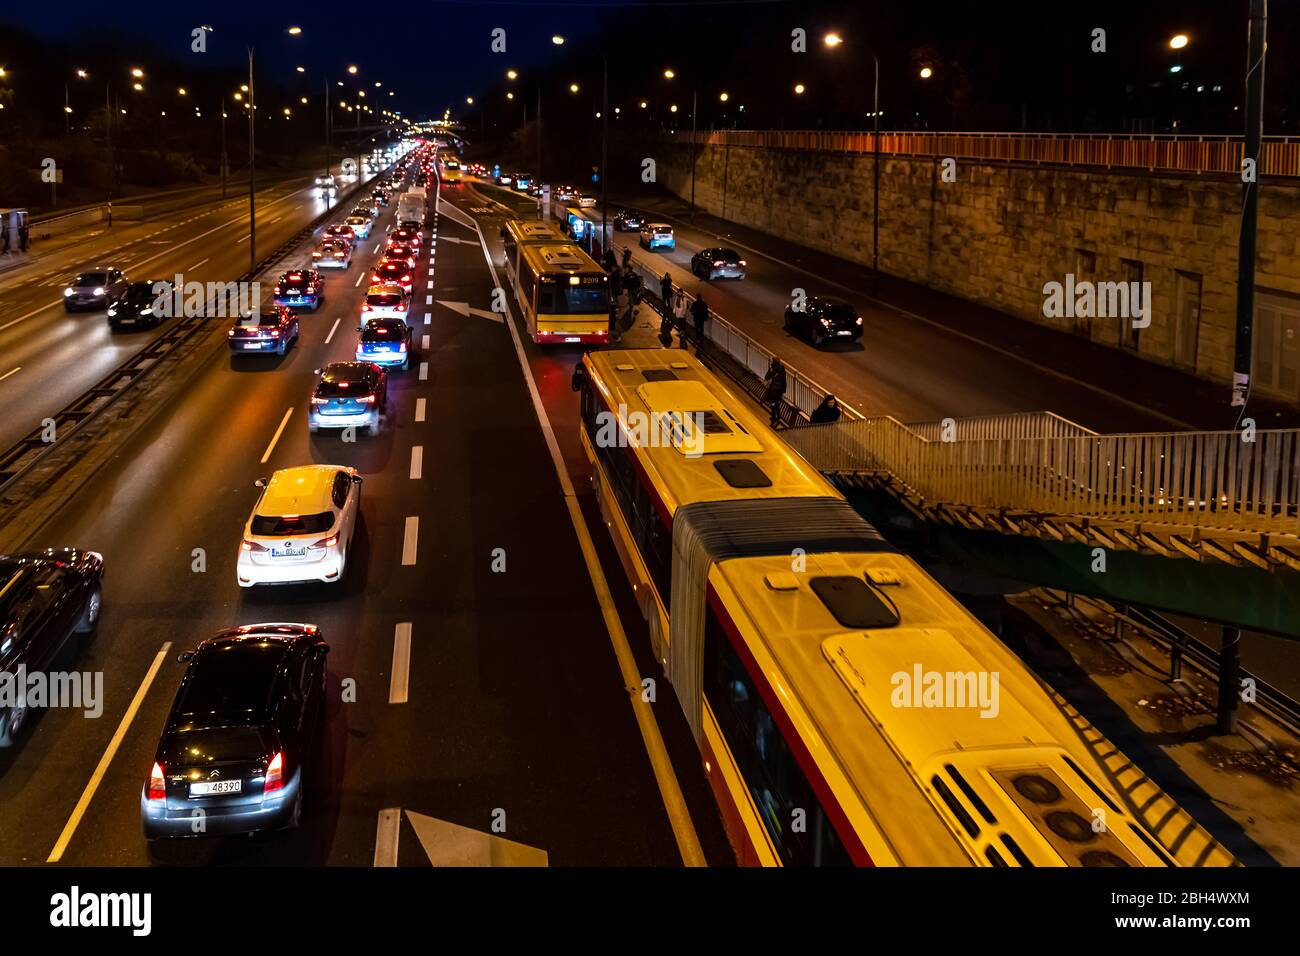 Warsaw, Poland - December 20, 2019: Above high angle aerial view of Aleja Armii Ludowej street avenue in Warszawa at night with traffic cars, people s Stock Photo